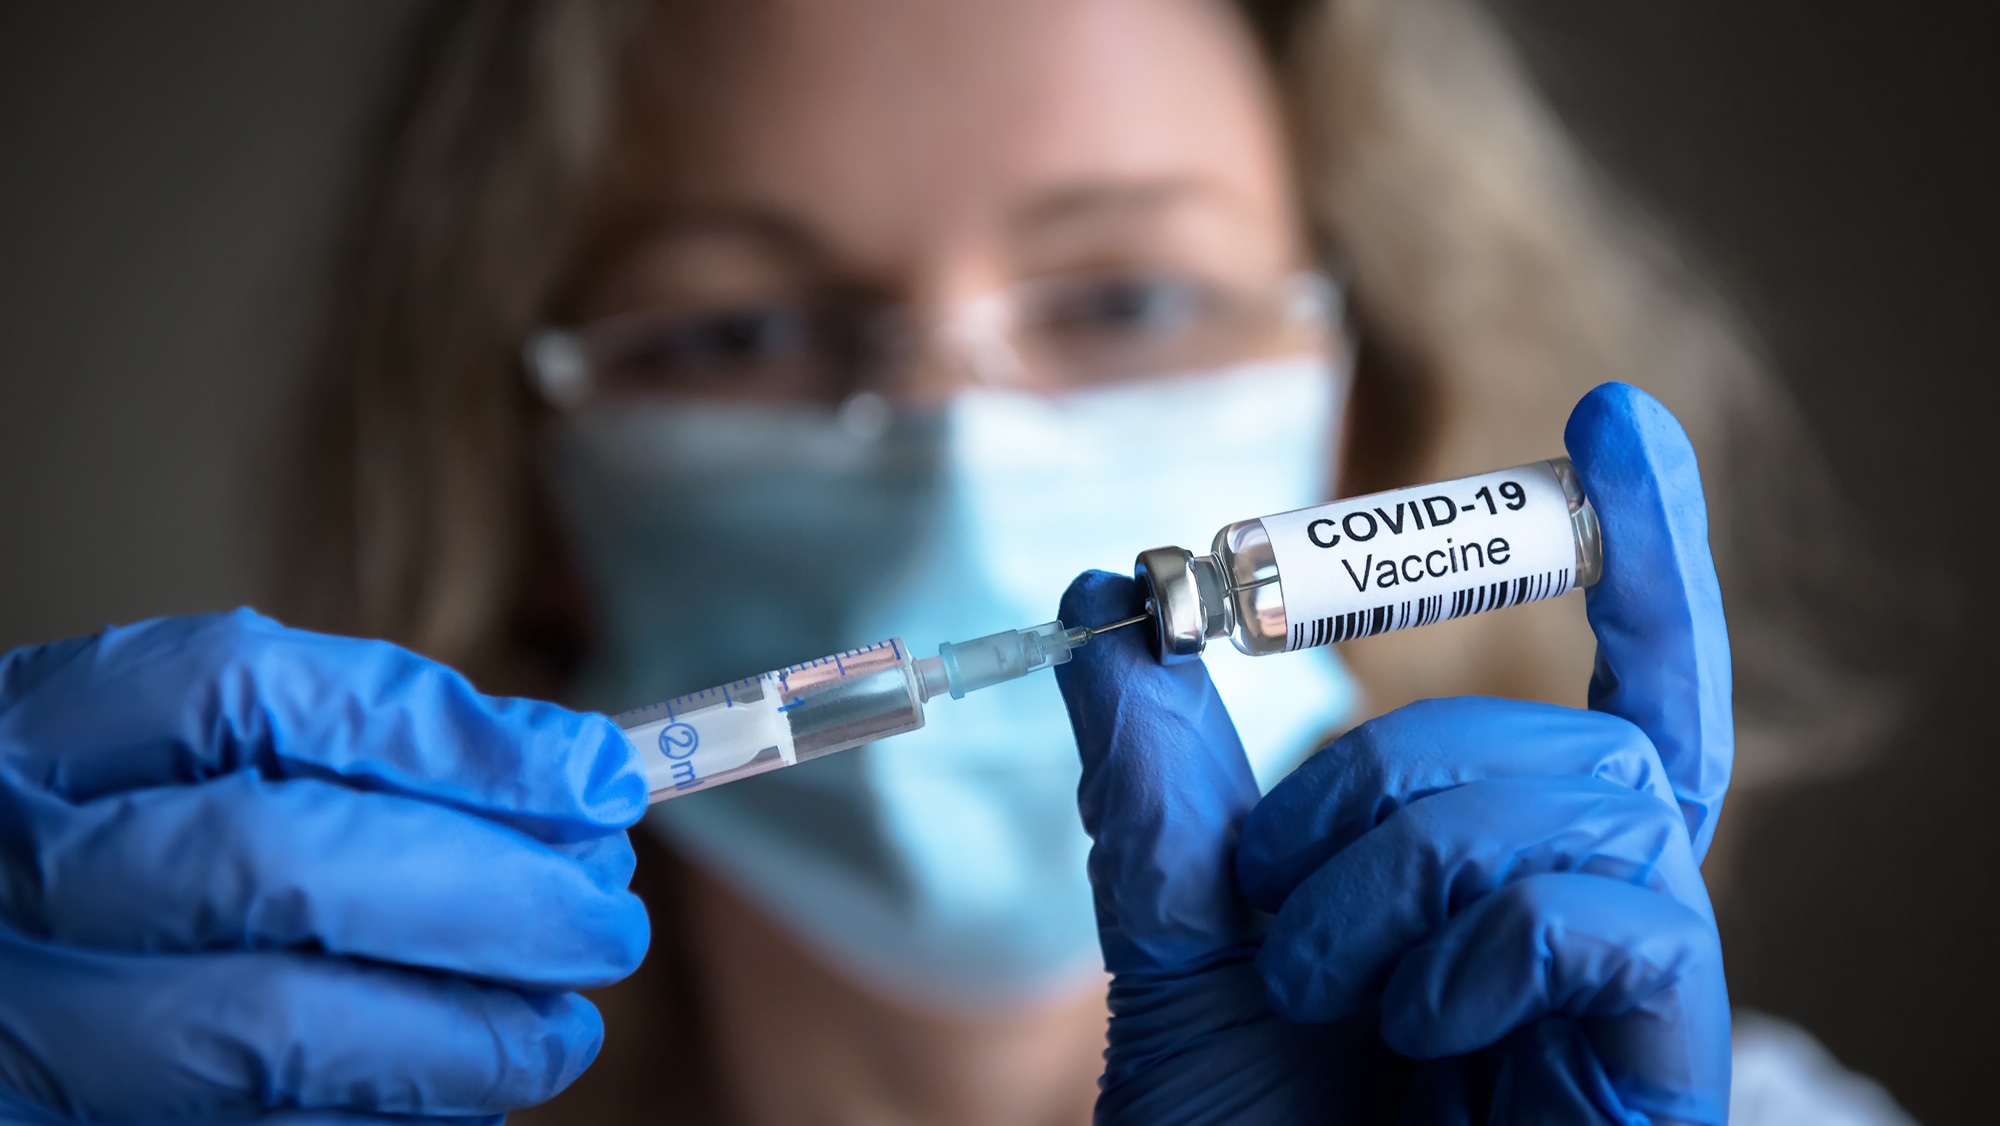 Action Fraud is warning the public to remain vigilant as criminals begin to take advantage of the roll out of the COVID-19 vaccine to commit fraud, UKNIP